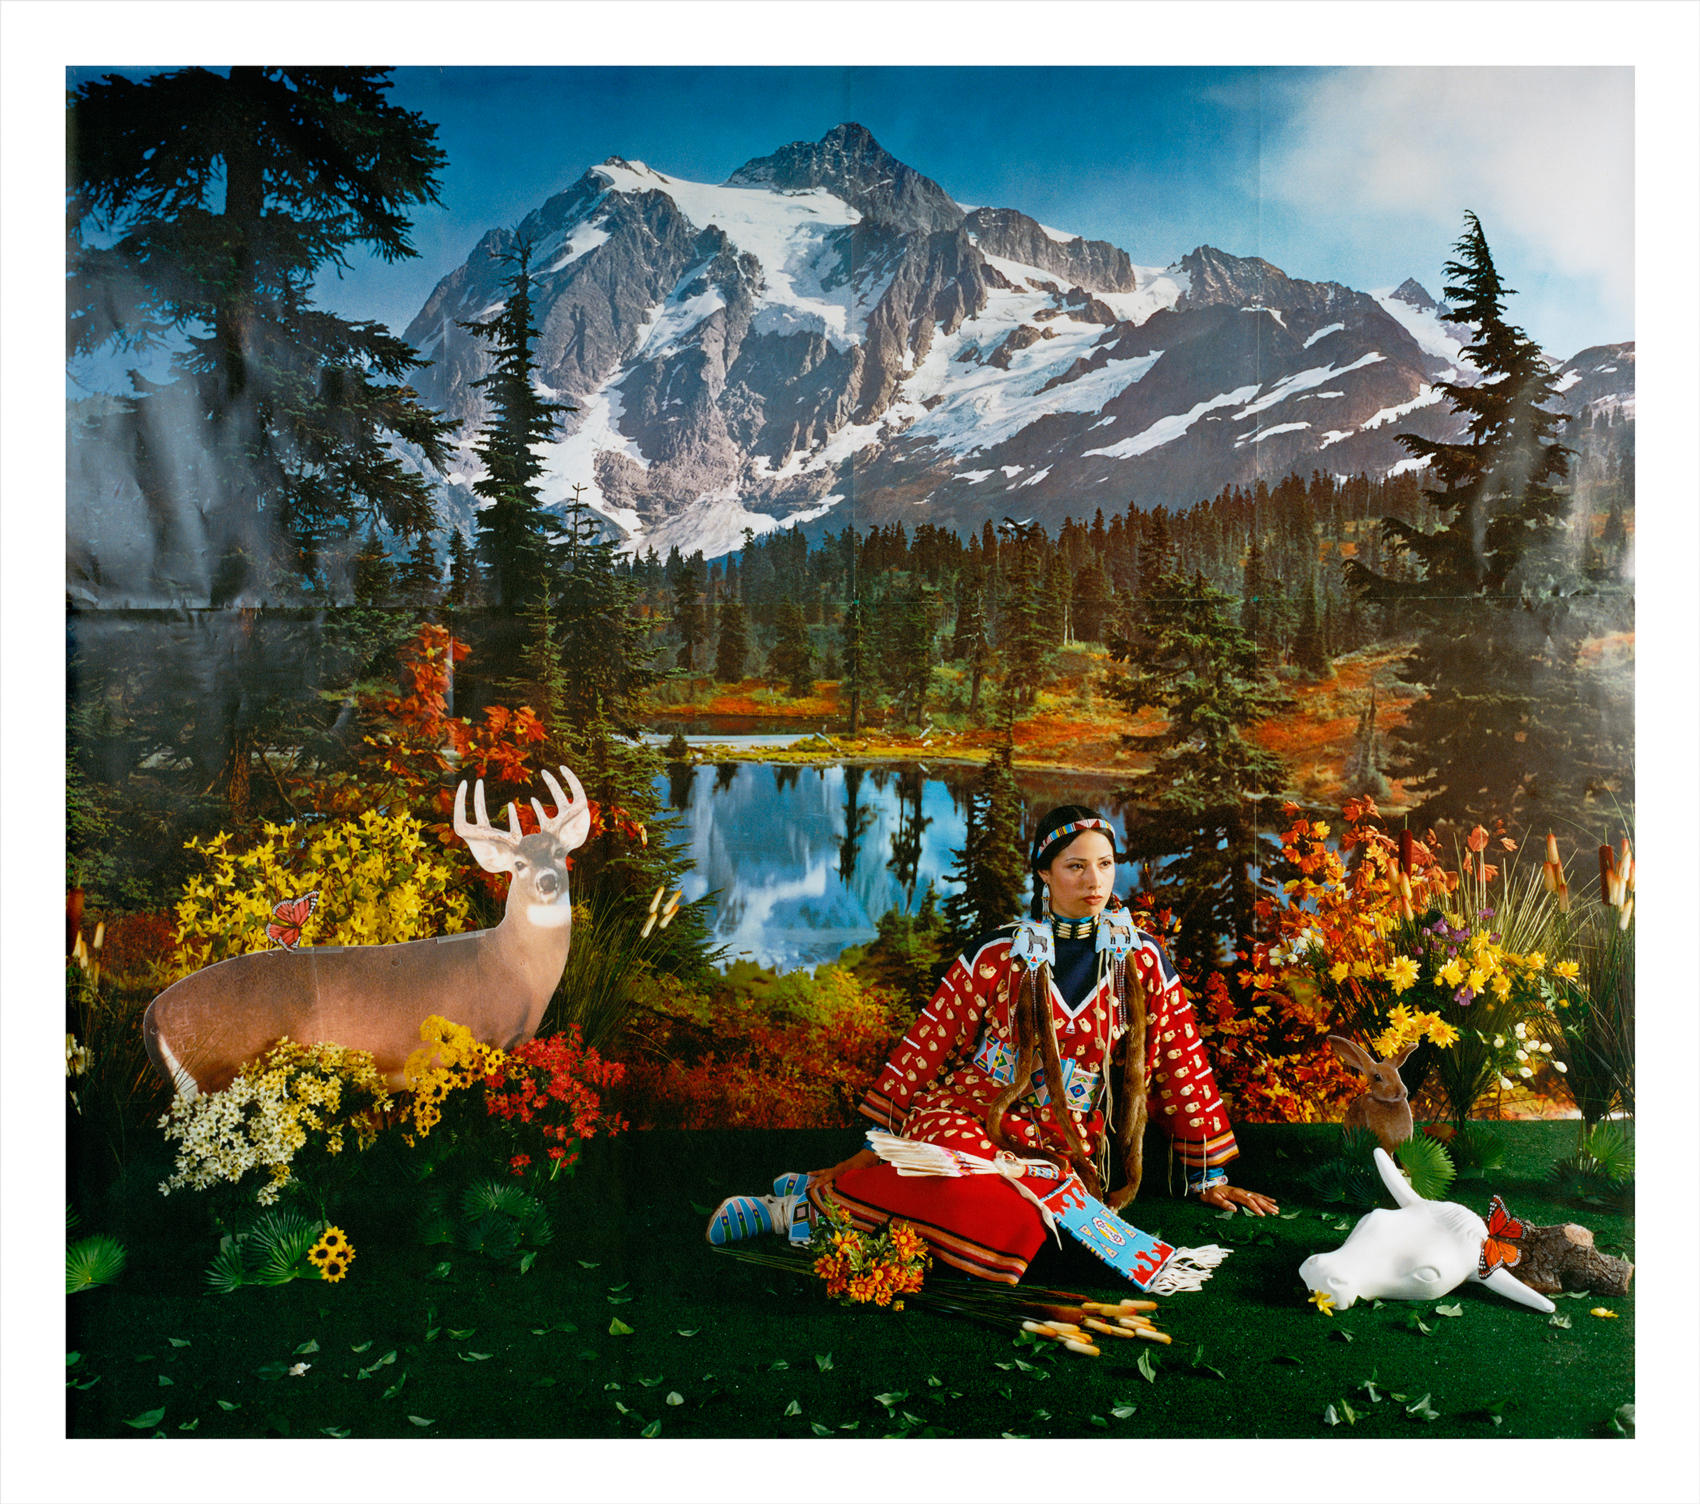  Wendy Red Star,  Summer (Four Seasons Series) , 2006, archival pigment print. 